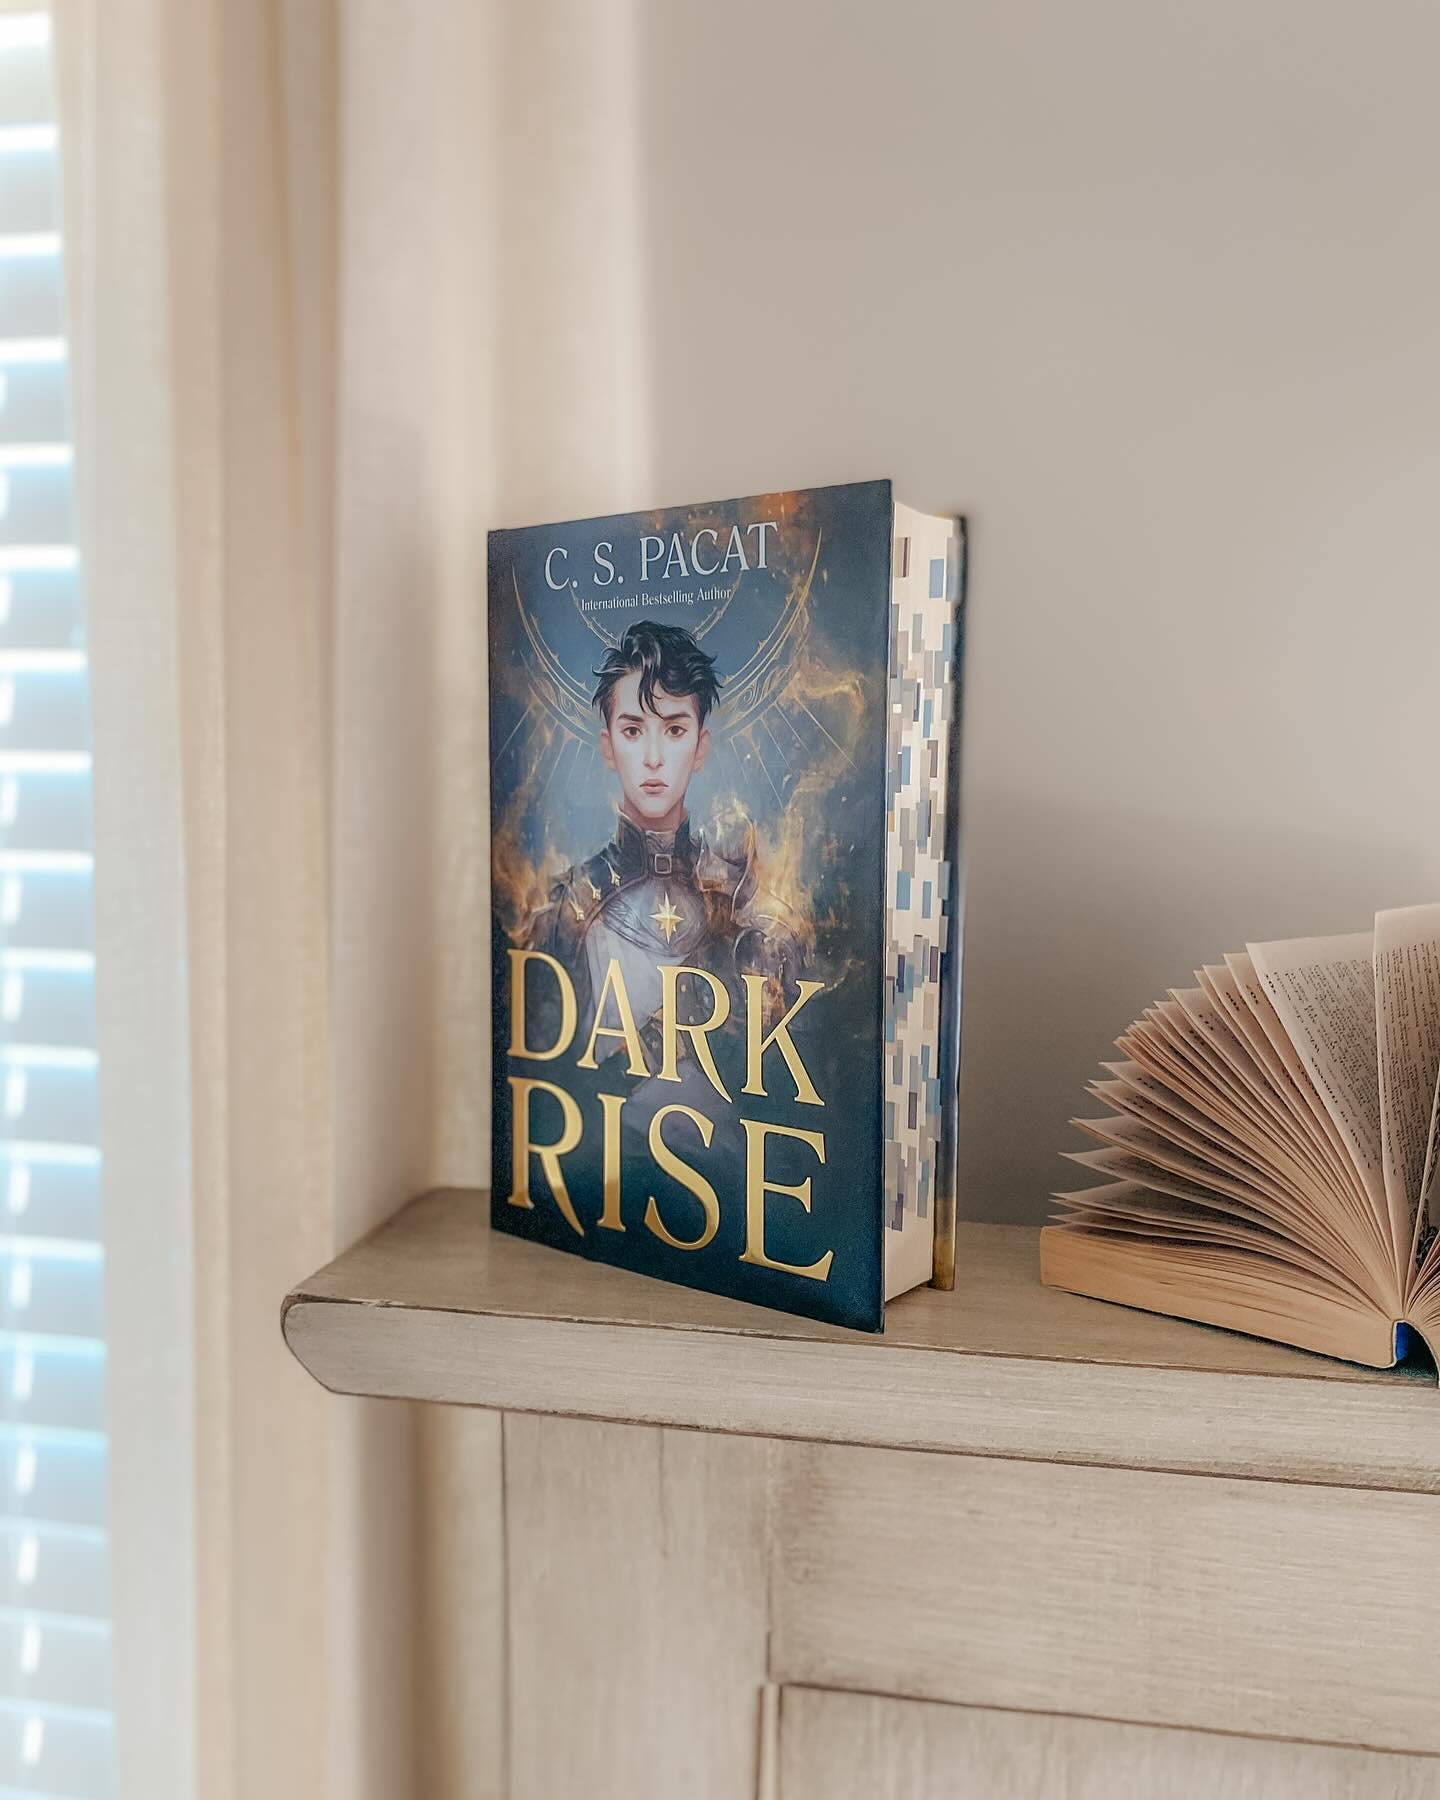 &bull; DARK RISE  r e v i e w

I am obsessed. I can&rsquo;t believe I waited this long to finally experience this story &mdash; Dark Rise is another that ended up sitting on my shelf for too many years. Why aren&rsquo;t more people talking about this